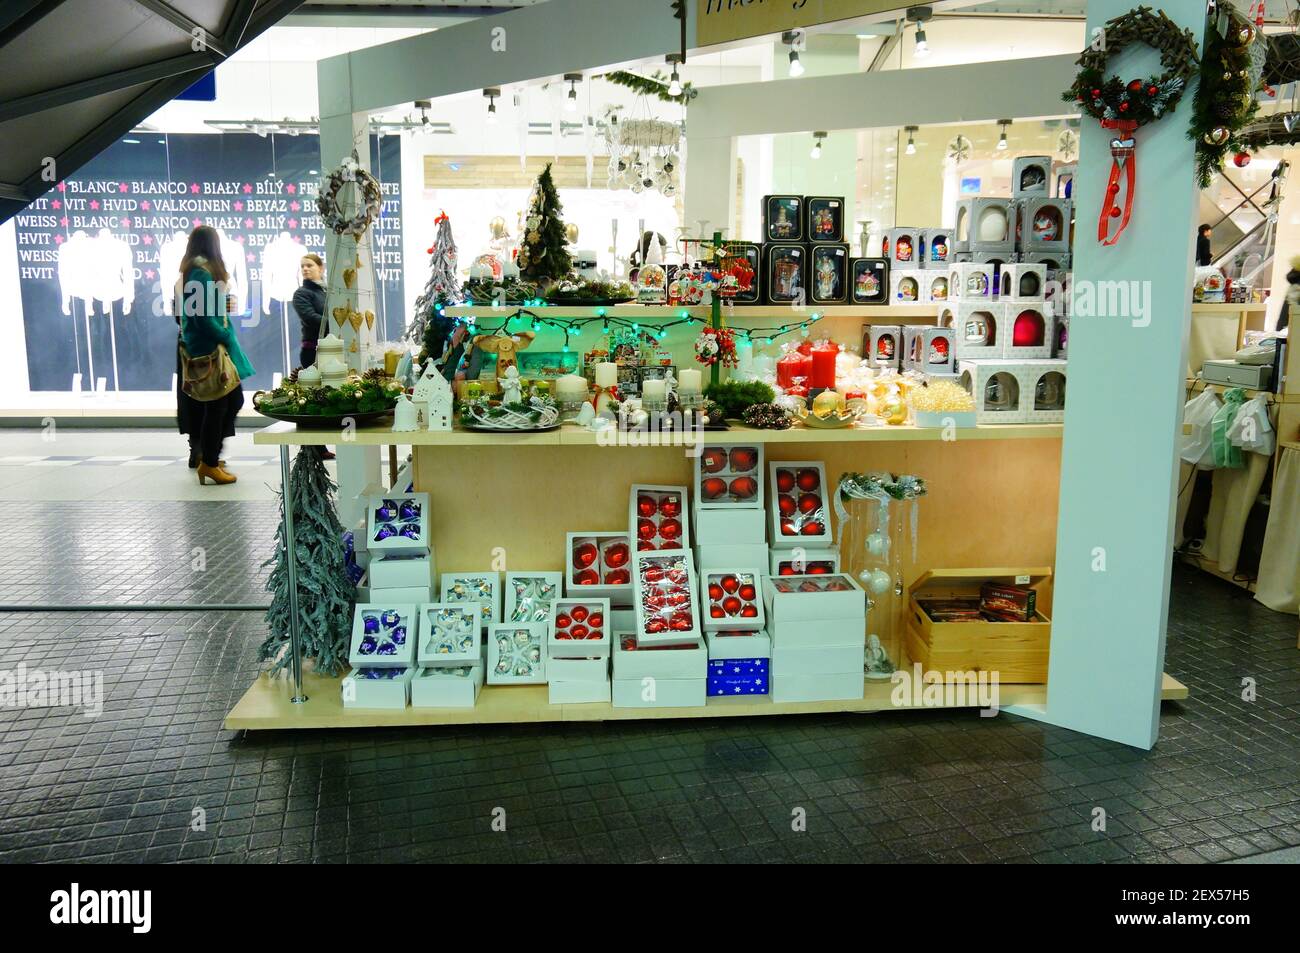 POZNAN, POLAND - Dec 01, 2013: Christmas decoration for sale at a stand in the Stary Browar shopping mall Stock Photo